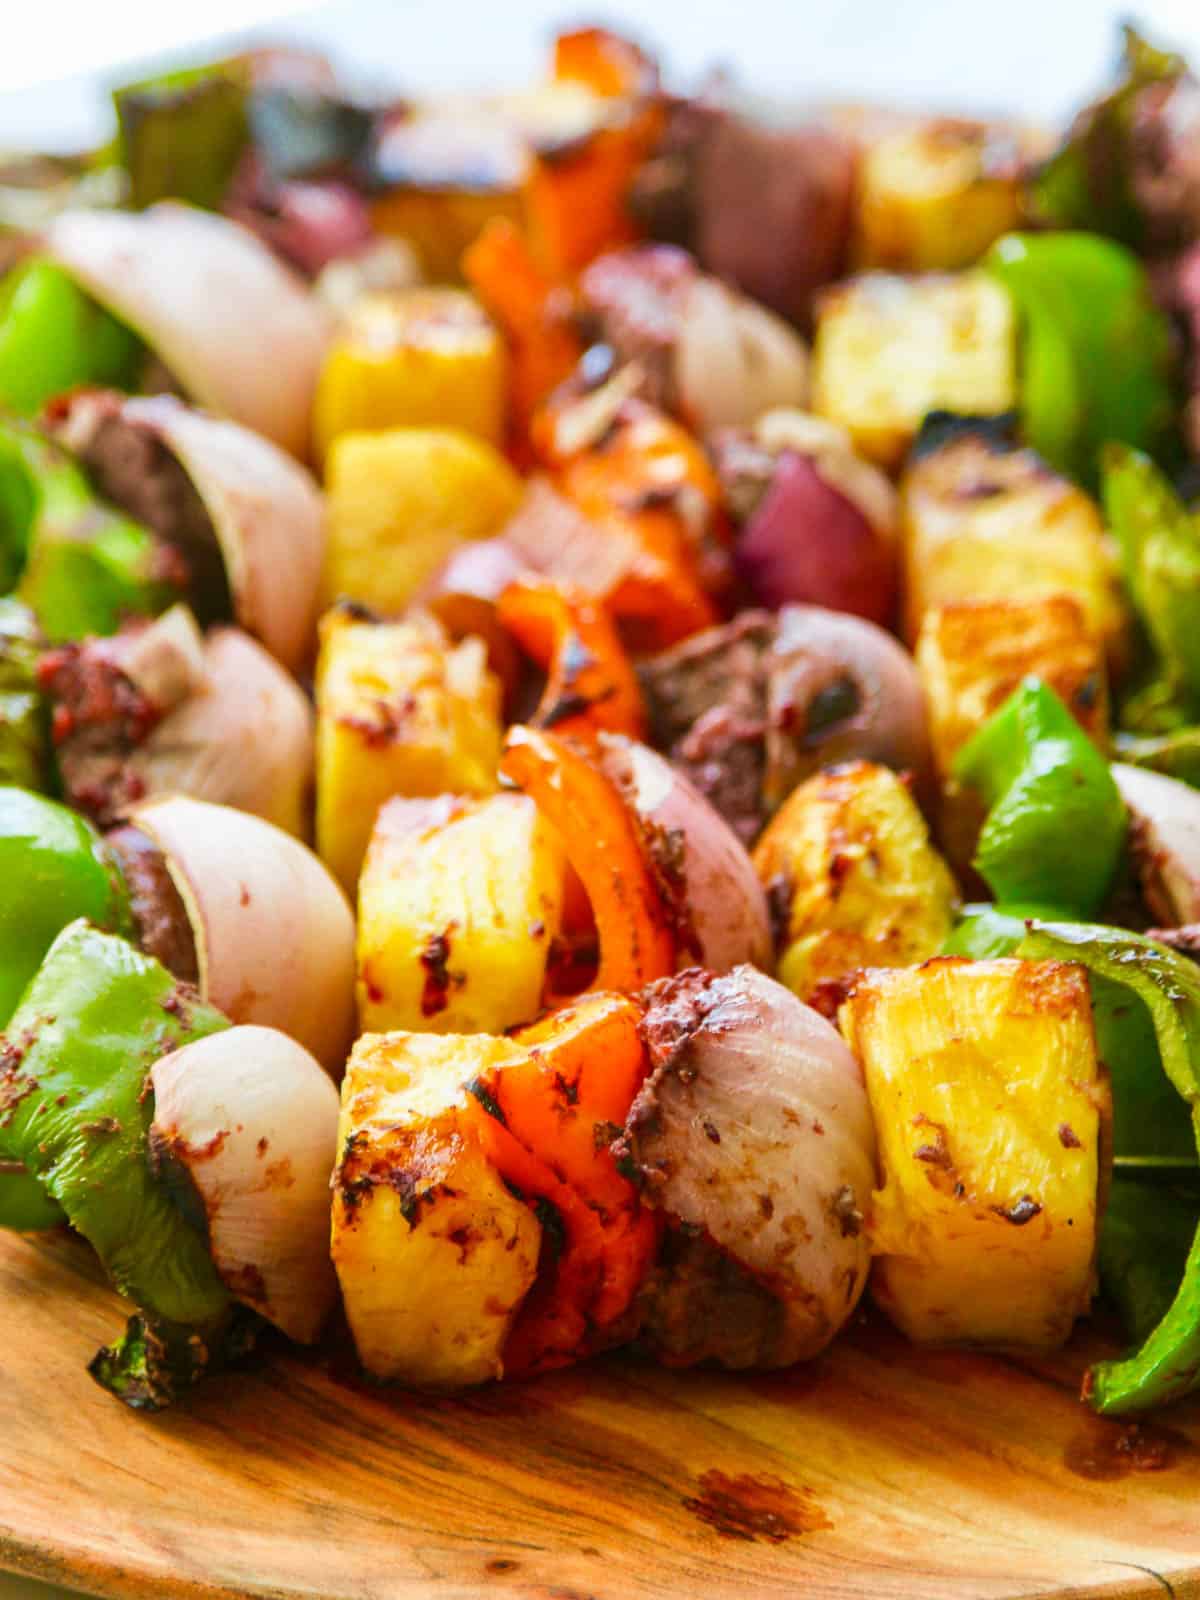 Grilled skewer shish kabobs made with beef, bell pepper, pineapple, and onion.